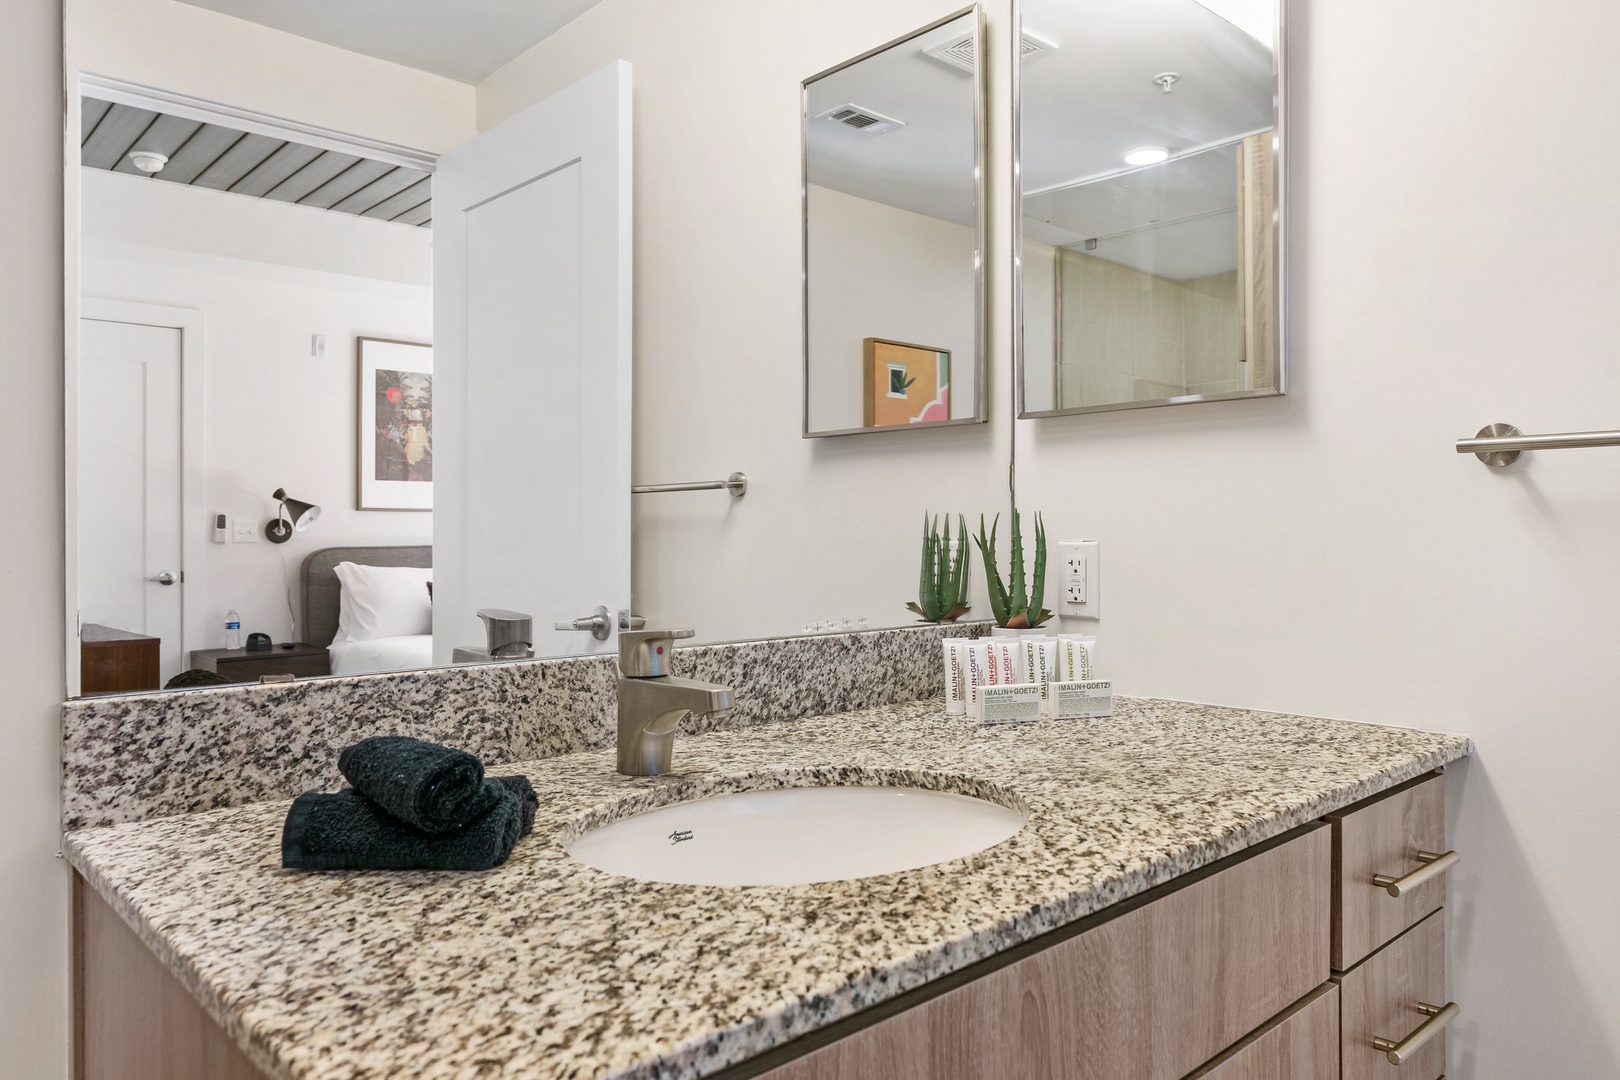 Rejuvenate in the sleek bathroom with complimentary toiletries.